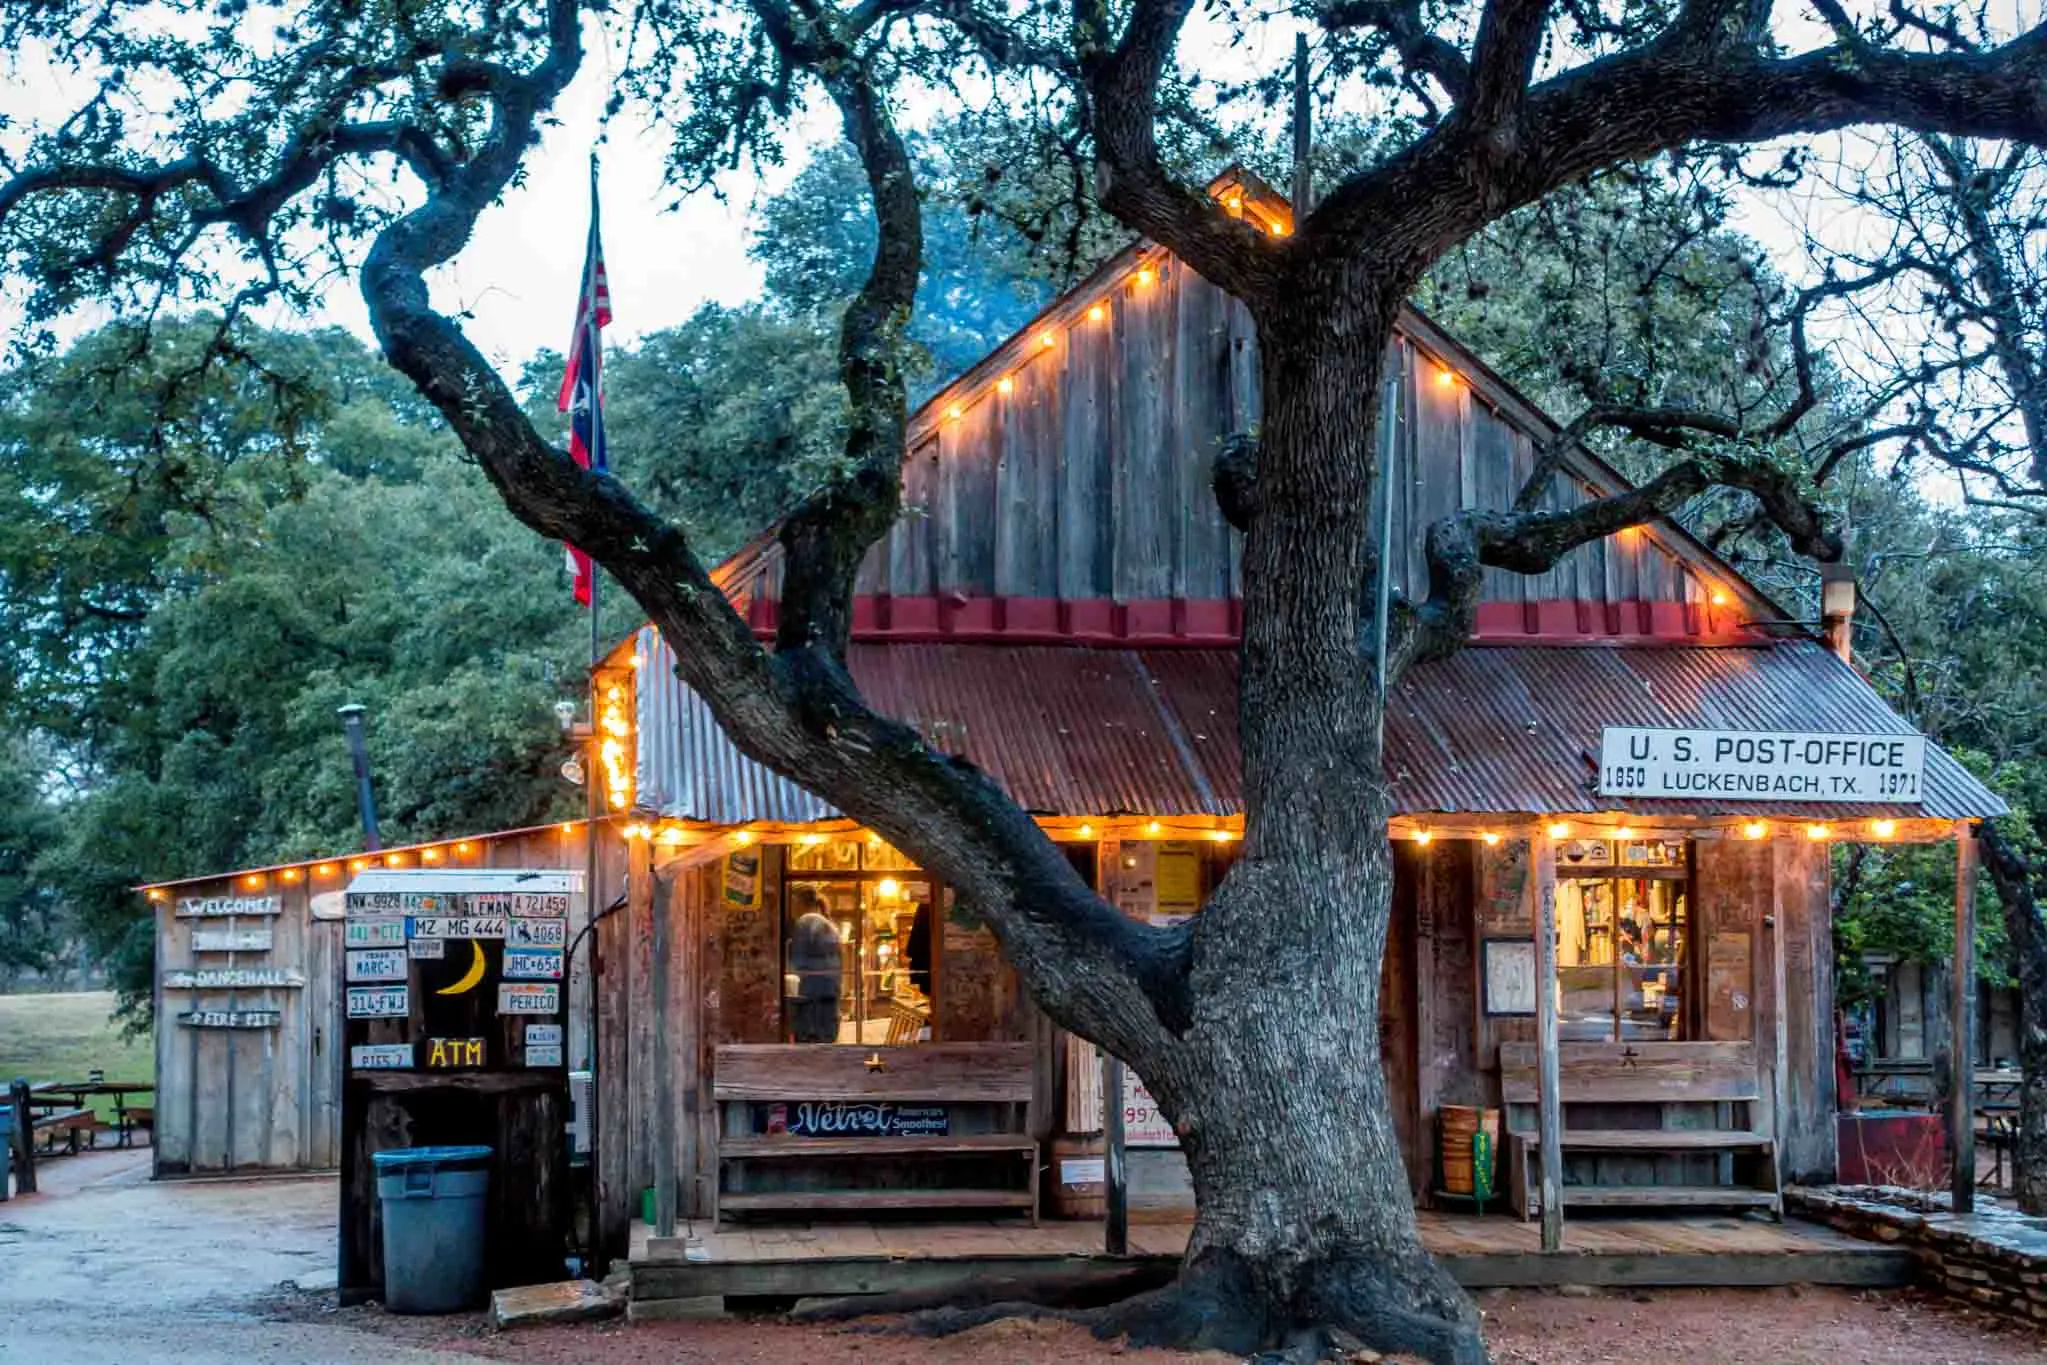 The Luckenbach Texas General Store